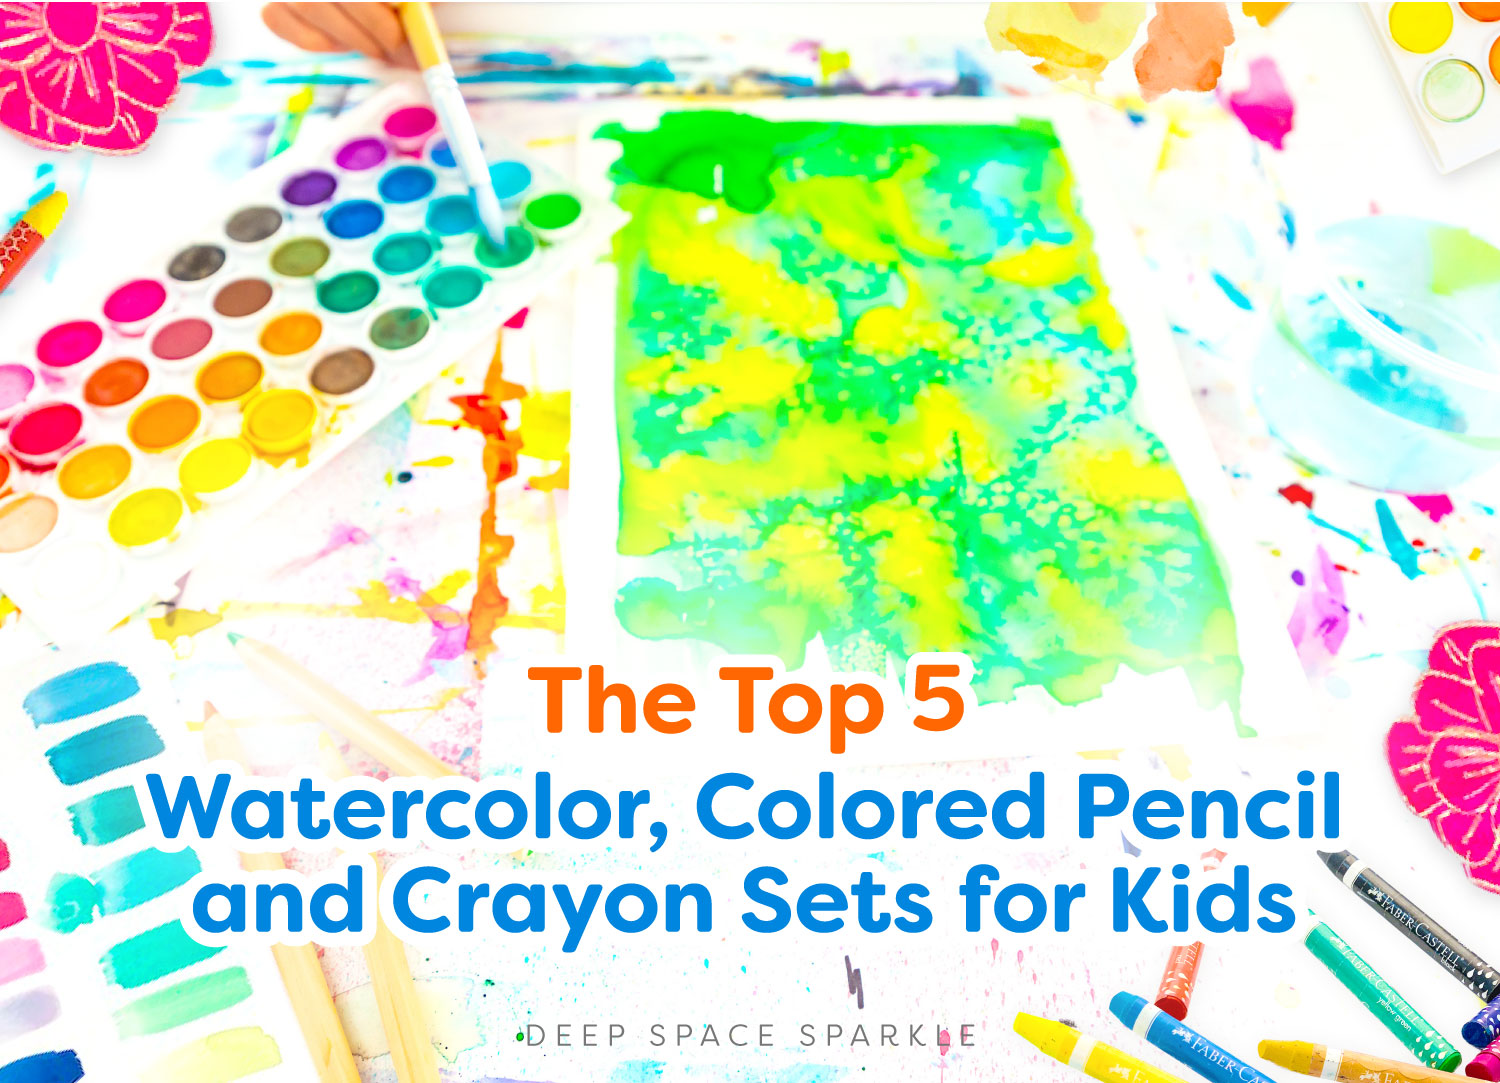 https://www.deepspacesparkle.com/wp-content/uploads/2019/07/Feature-The-Top-5-Watercolor-Colored-Pencil-and-Crayon-Sets-for-Kids.jpg